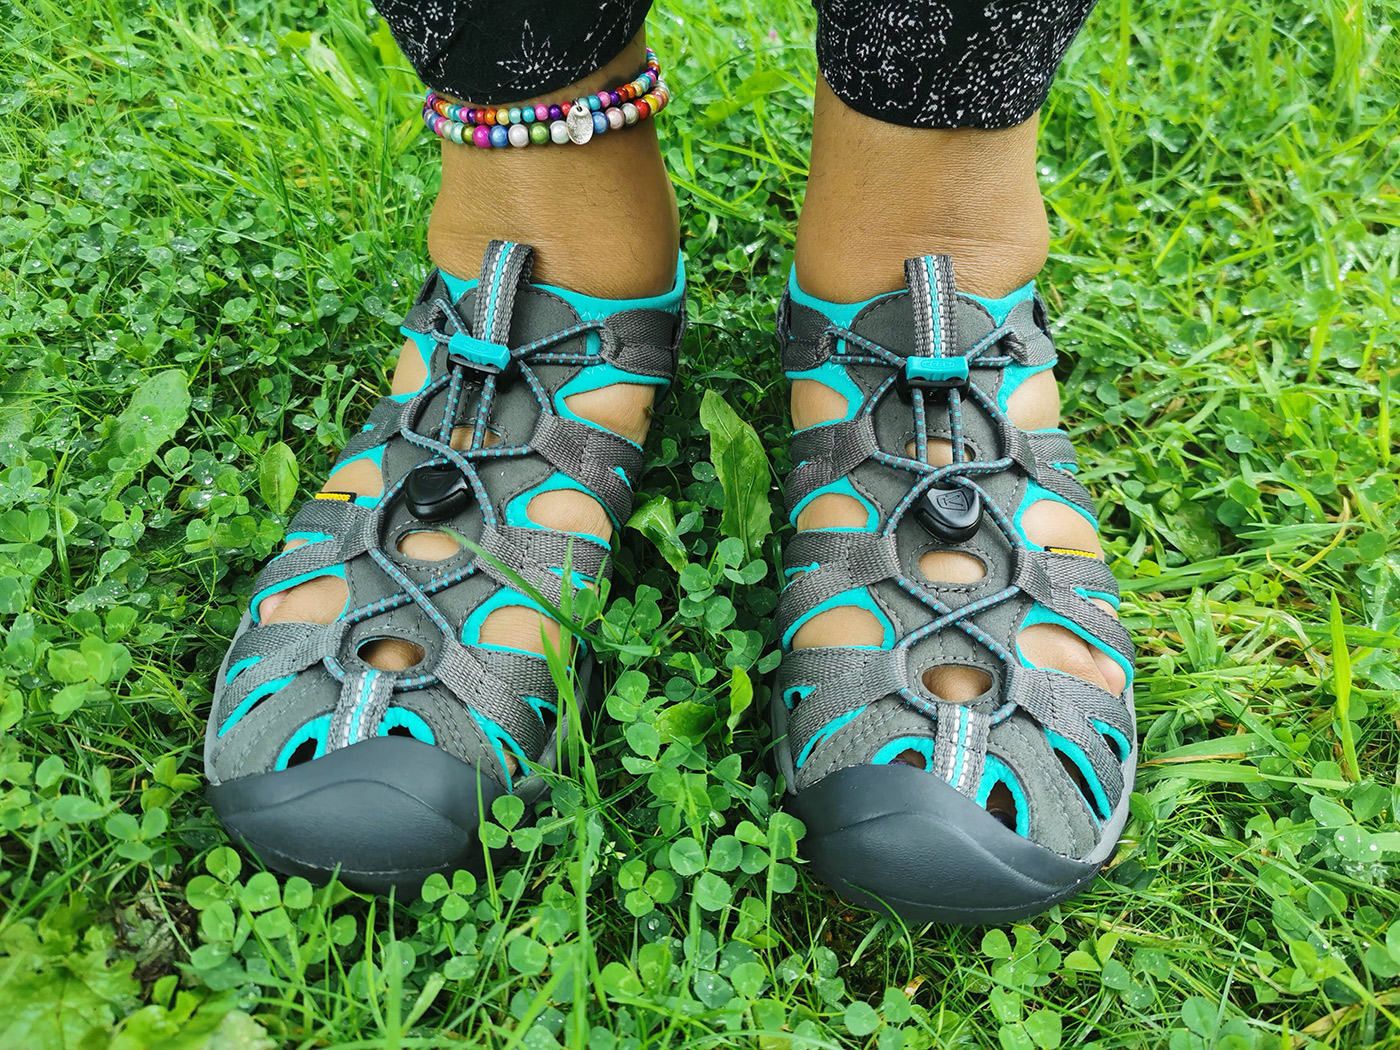 GEAR | KEEN Whisper Ladies Water Sandals - Review | Camping Blog Camping  with Style | Travel, Outdoors & Glamping Blog